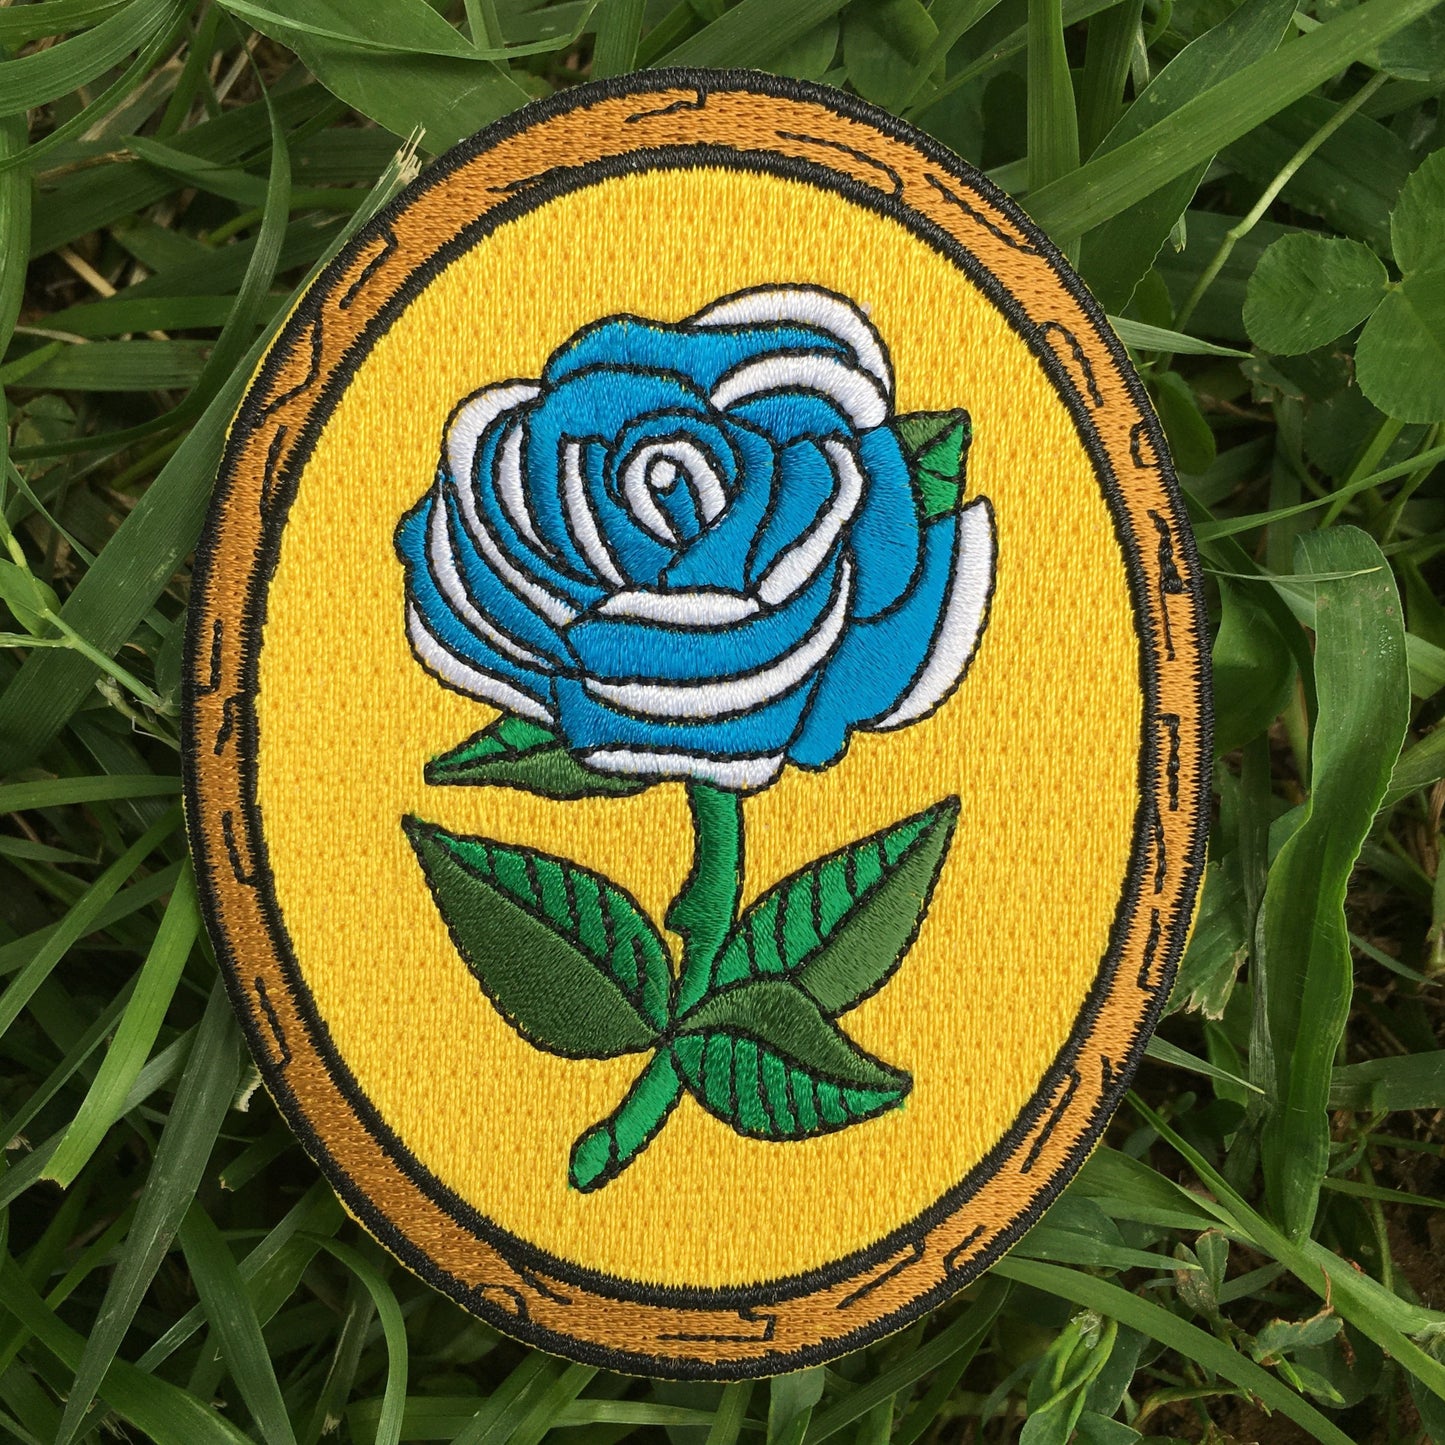 Antique Flower in Frame - One Day - Embroidered Patch - Blue Rose